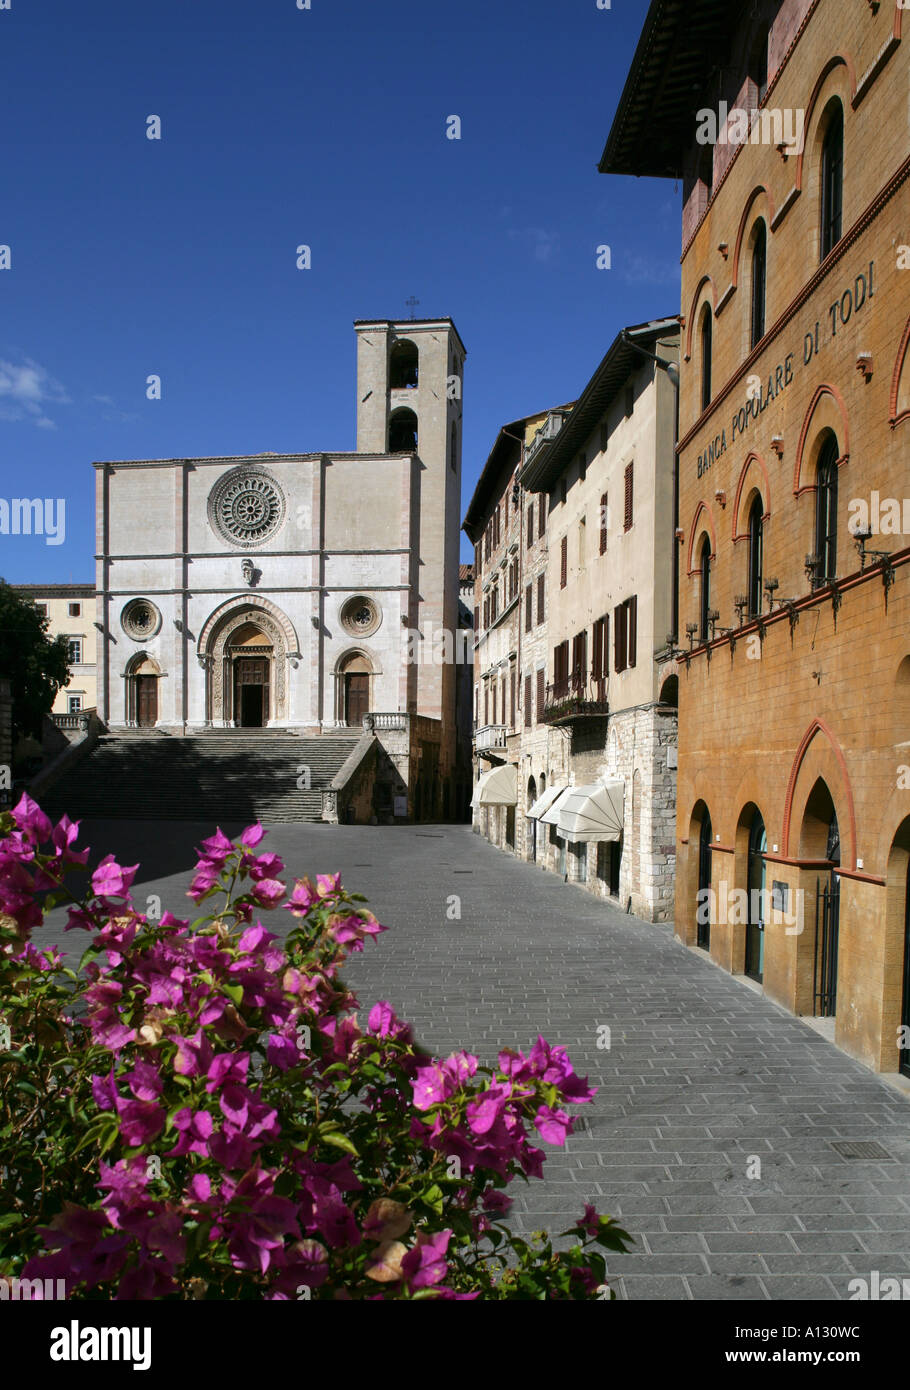 Romanesque cathedral in town square, Todi, Umbria, Italy. Stock Photo